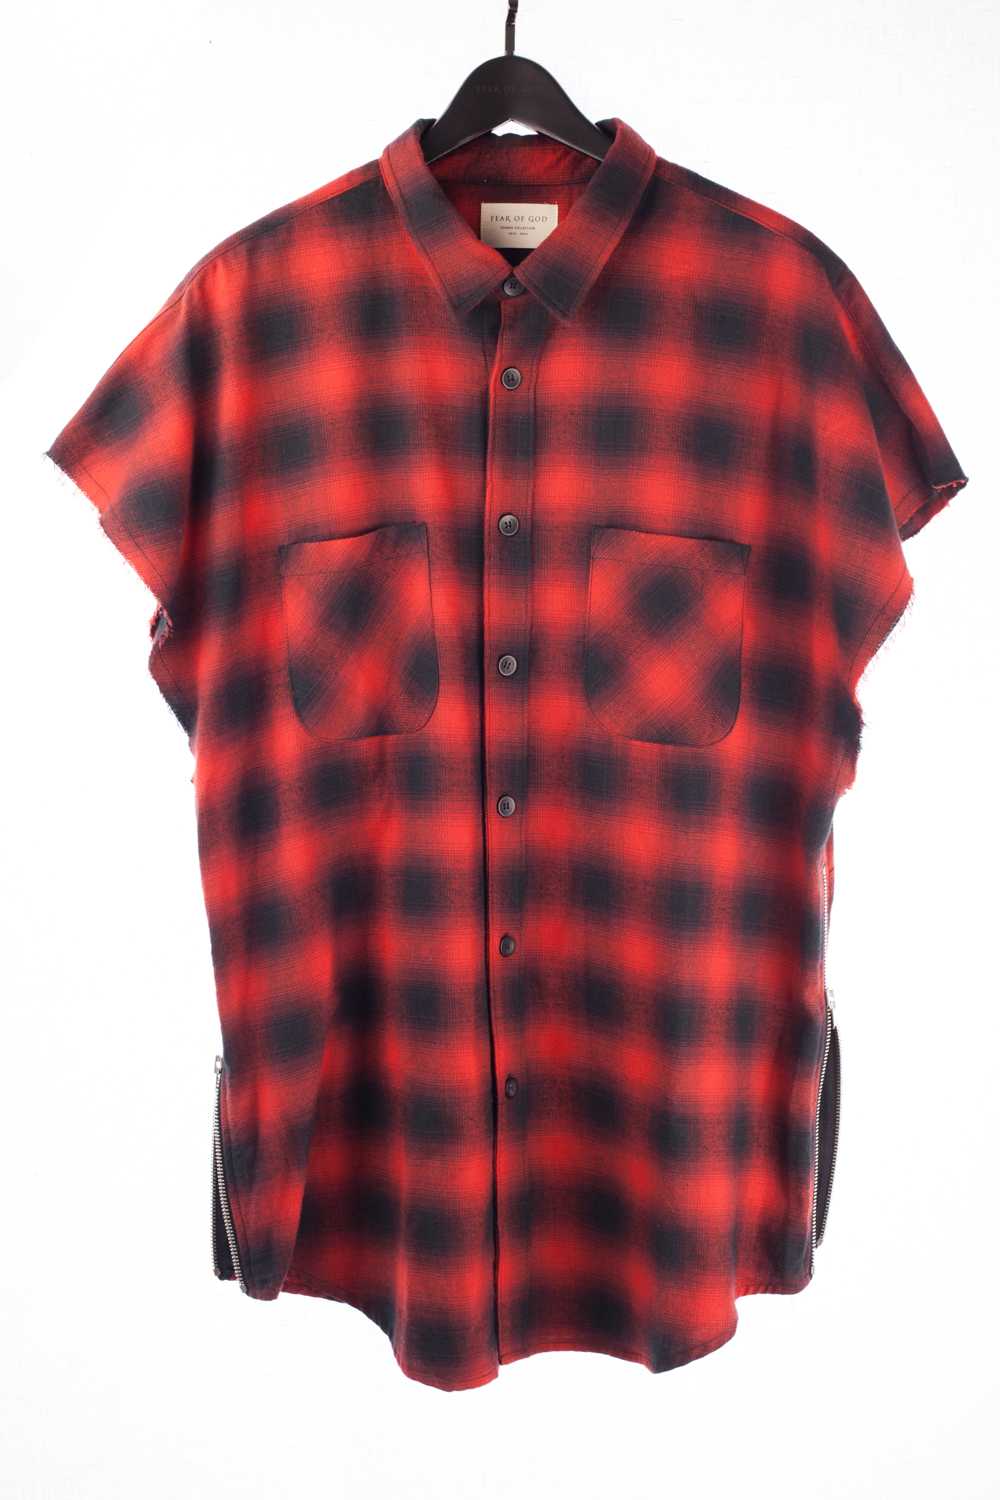 Maxfield Exclusive Sleeveless Flannel - image 1